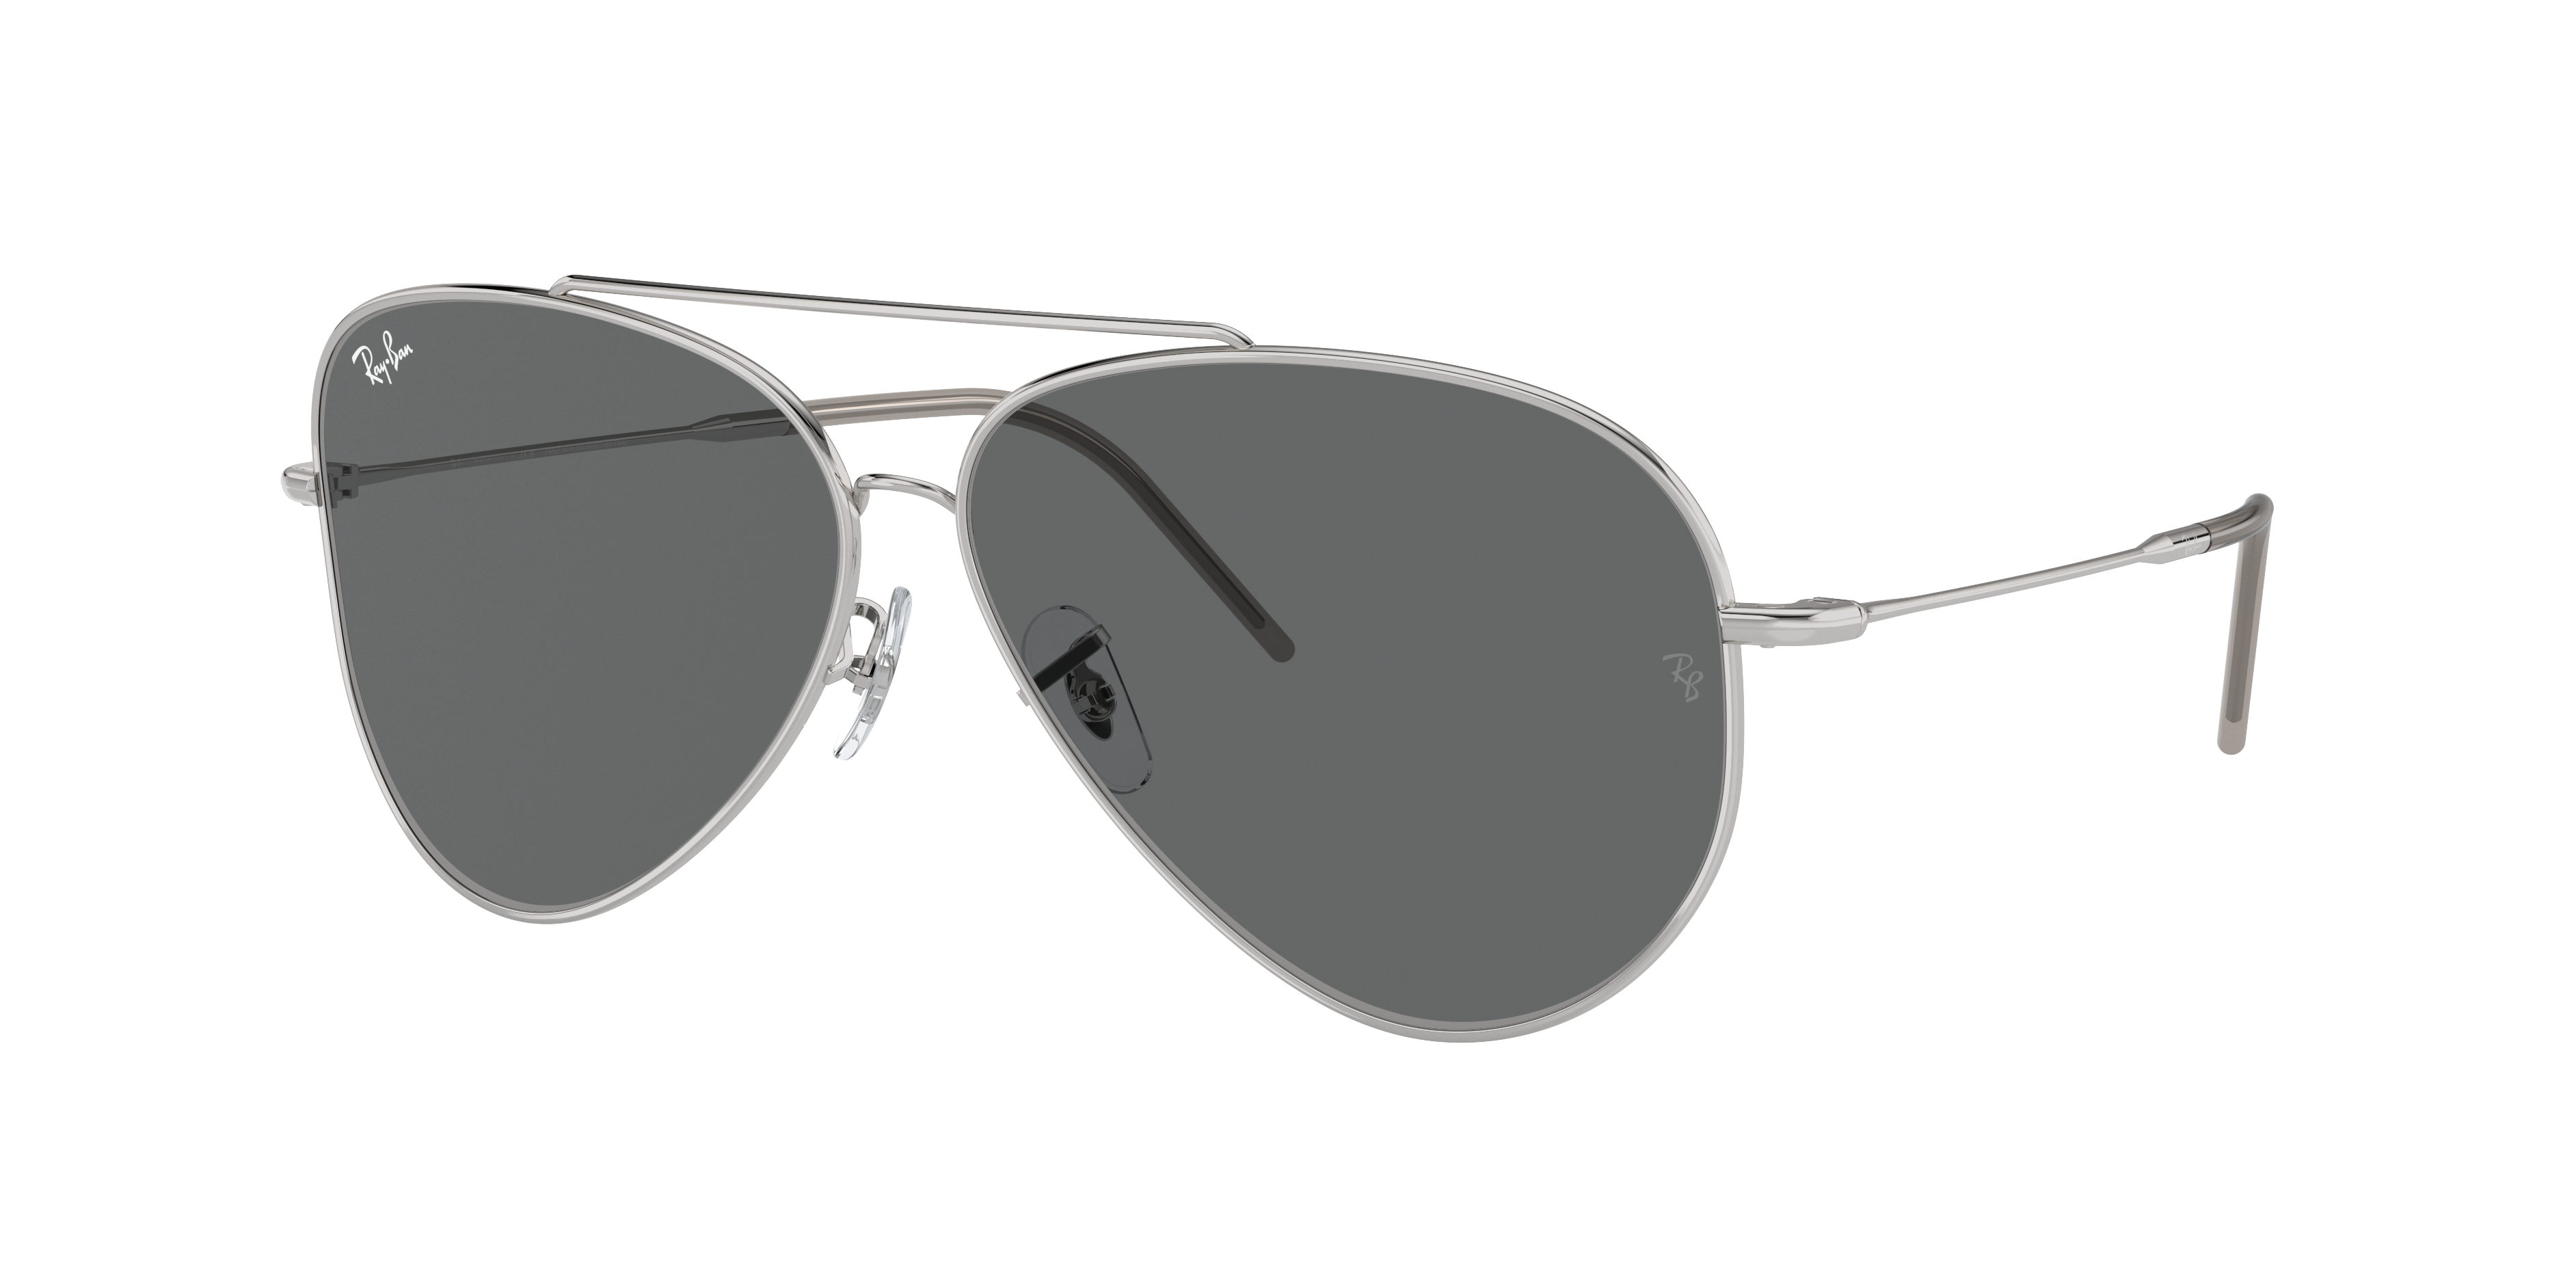 Aviator Reverse Sunglasses in Silver and Grey - RBR0101S | Ray-Ban® AU